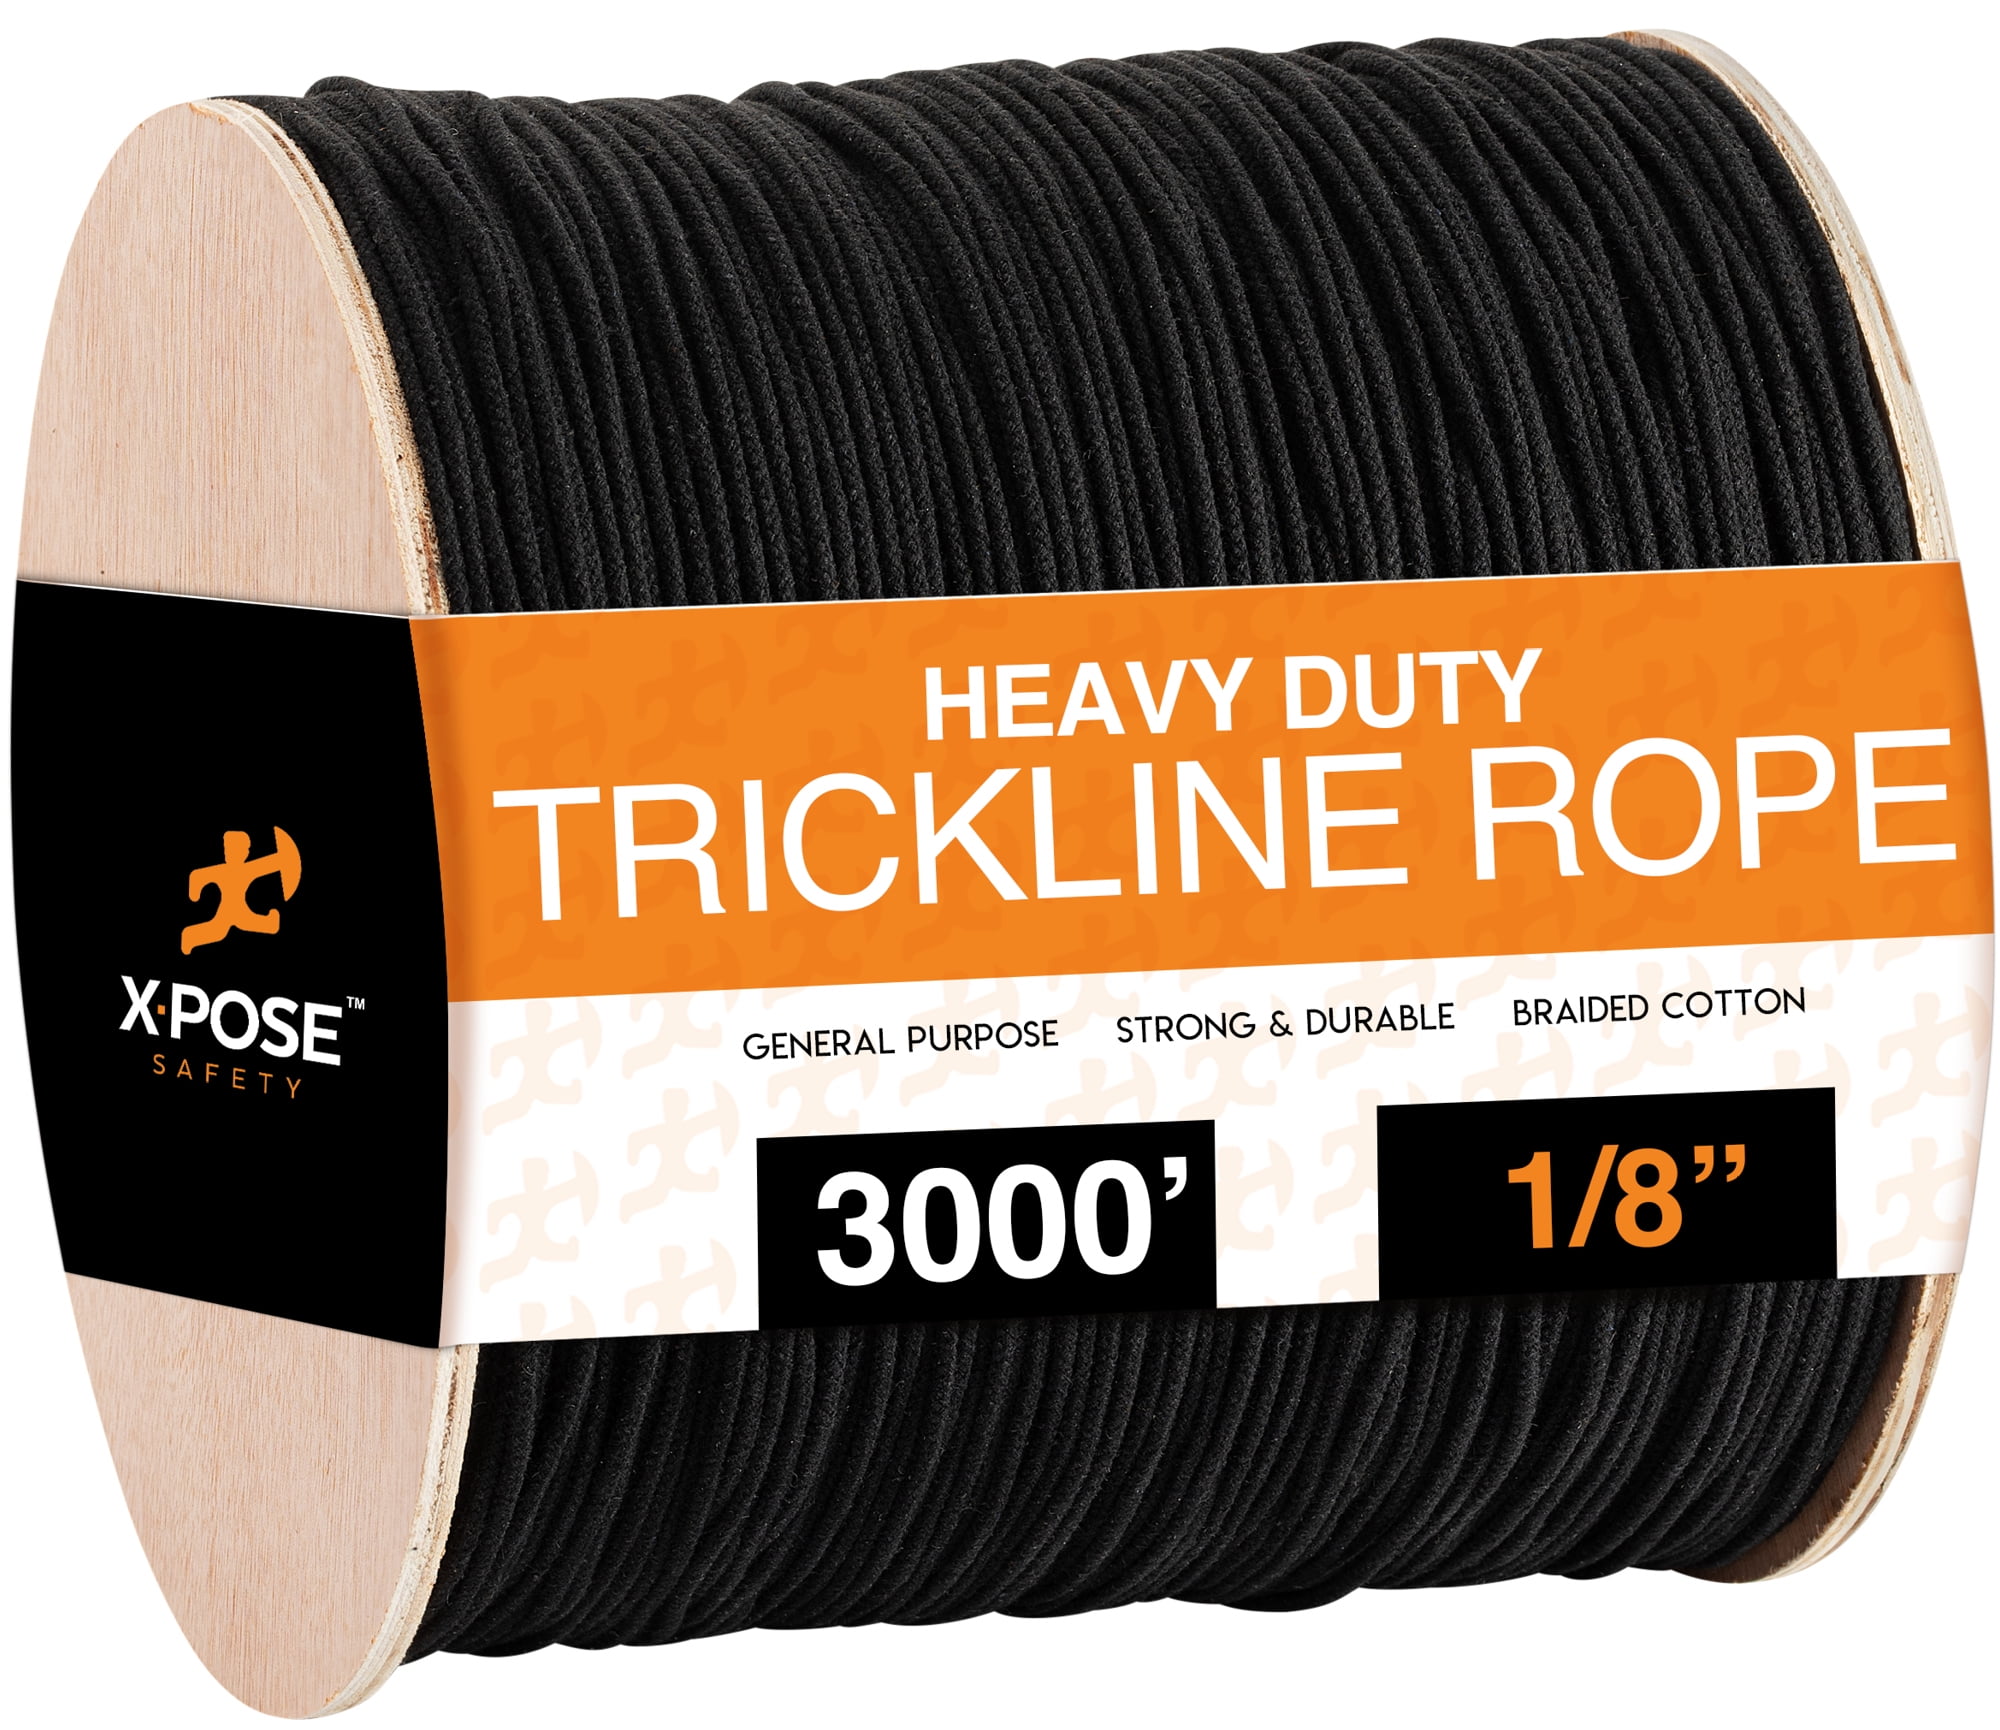 Black Unglazed Trickline Rope - 3,000 ft x 1/8 inch Theatrical Tie Line  Heavy Duty Spool, Cable Management and Wire Tie - for Theatre, Stage Decor